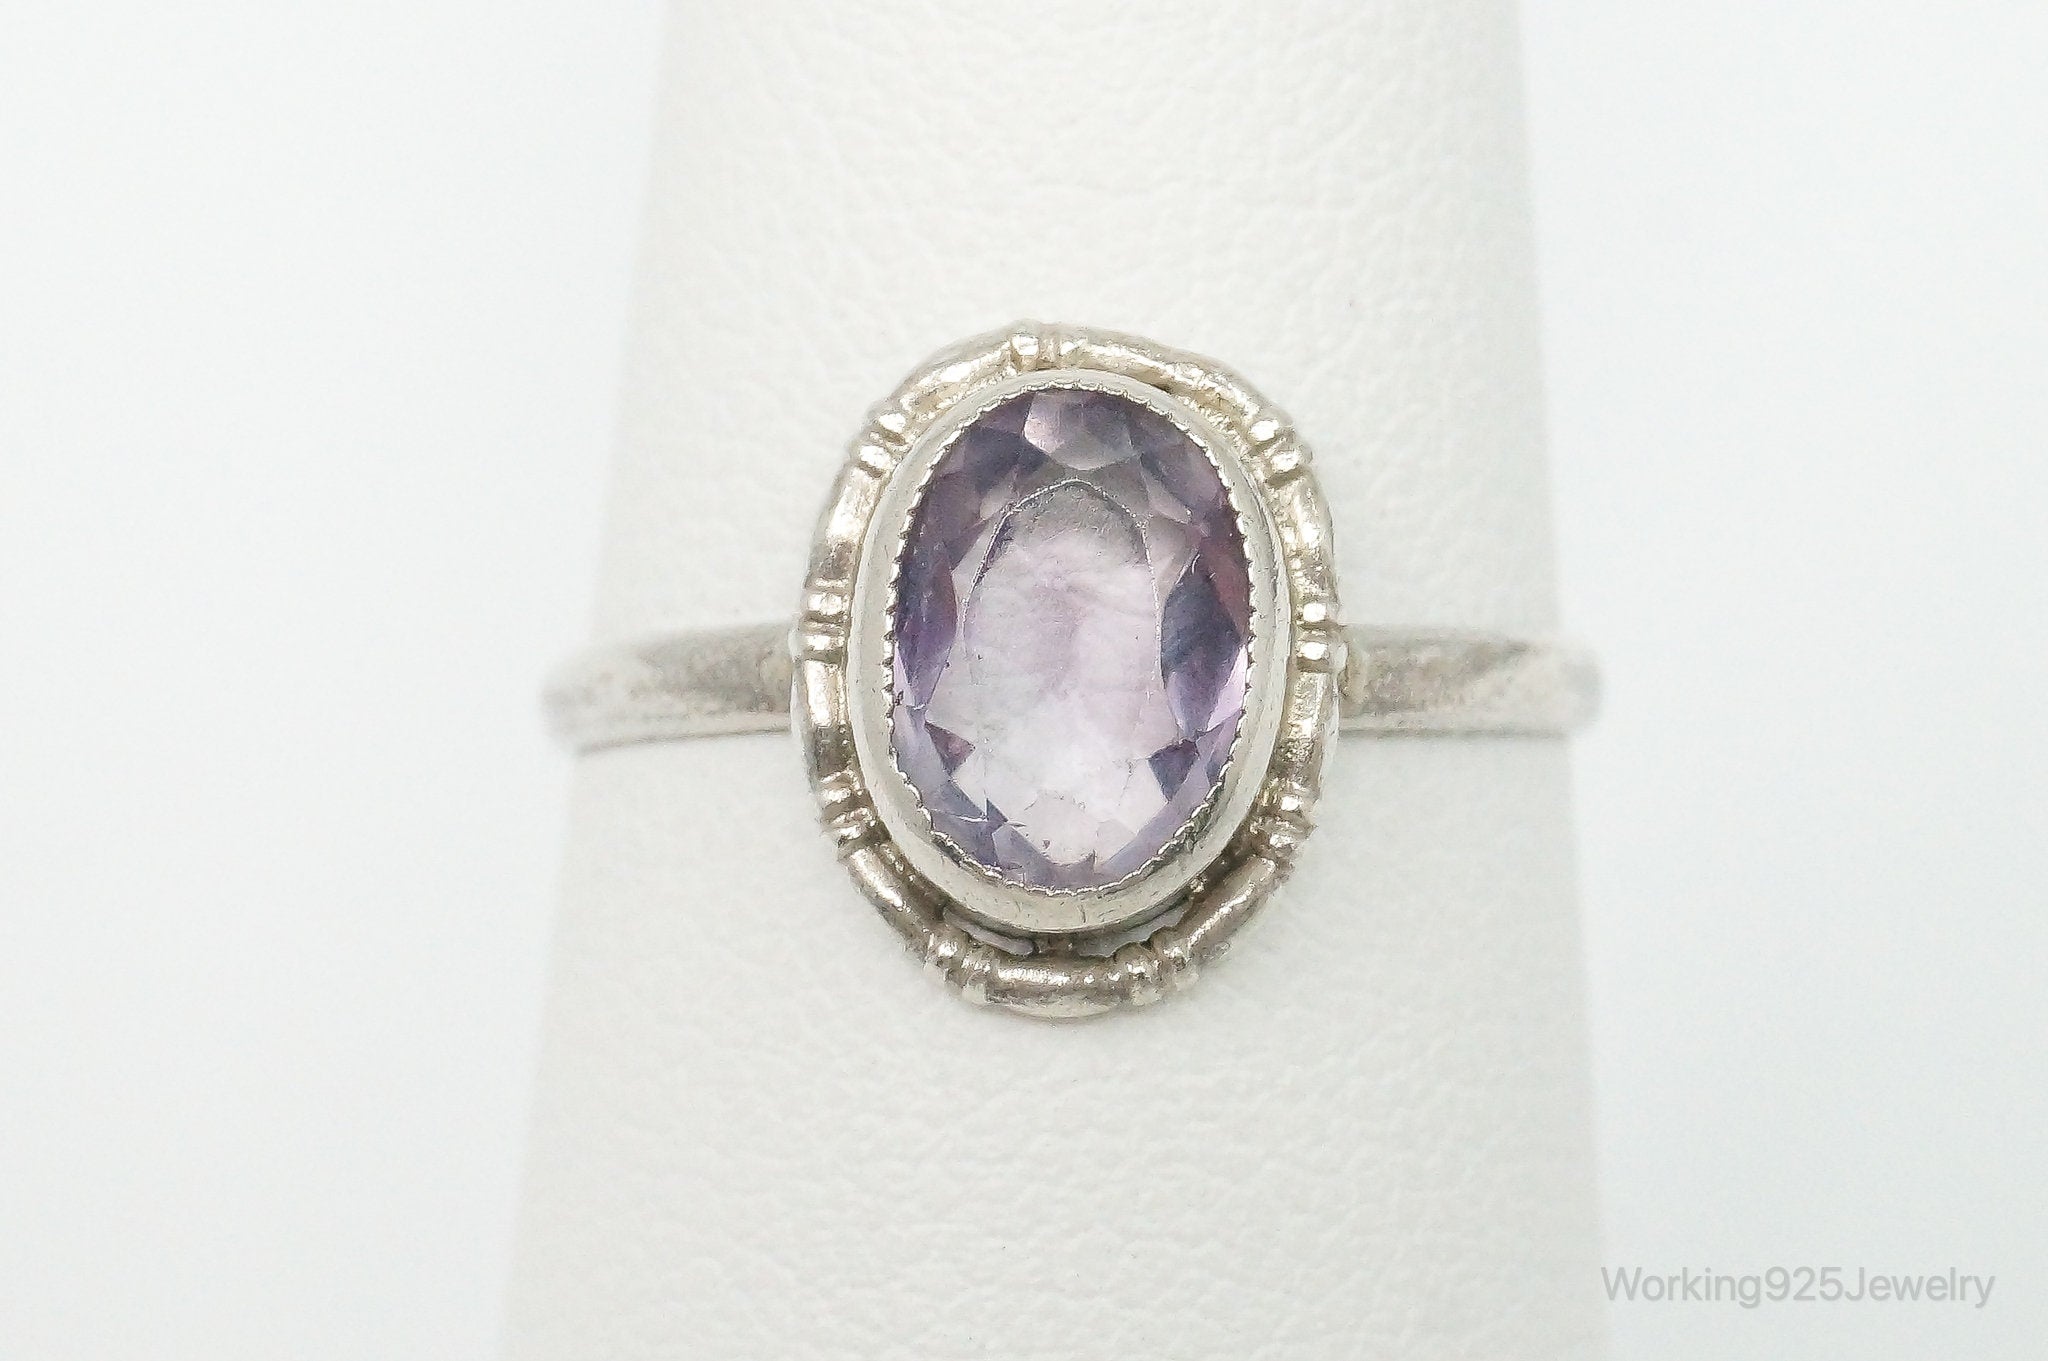 Antique Amethyst 835 Silver Ring - Size 7.75